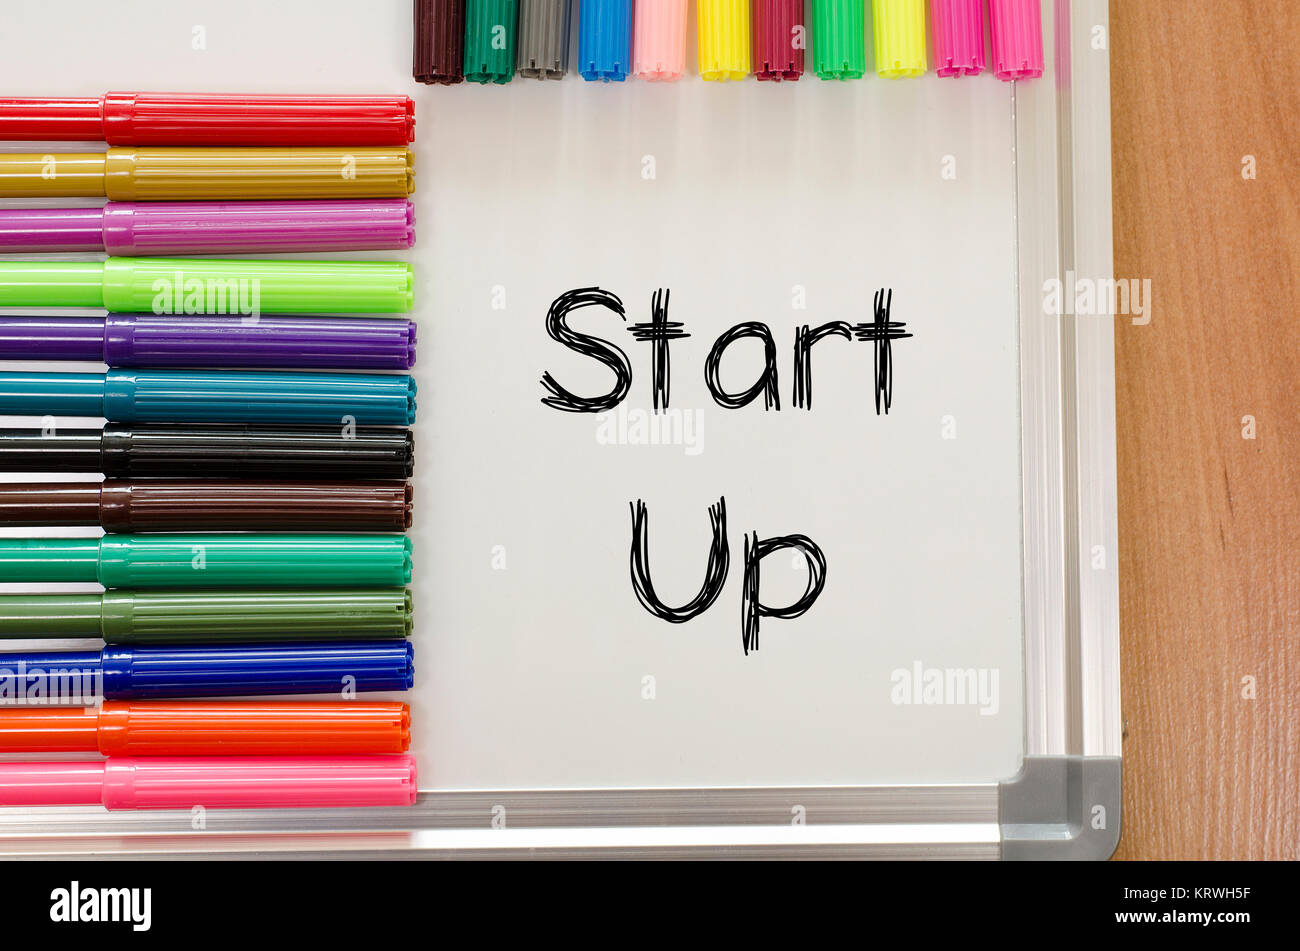 Start up text concept Stock Photo